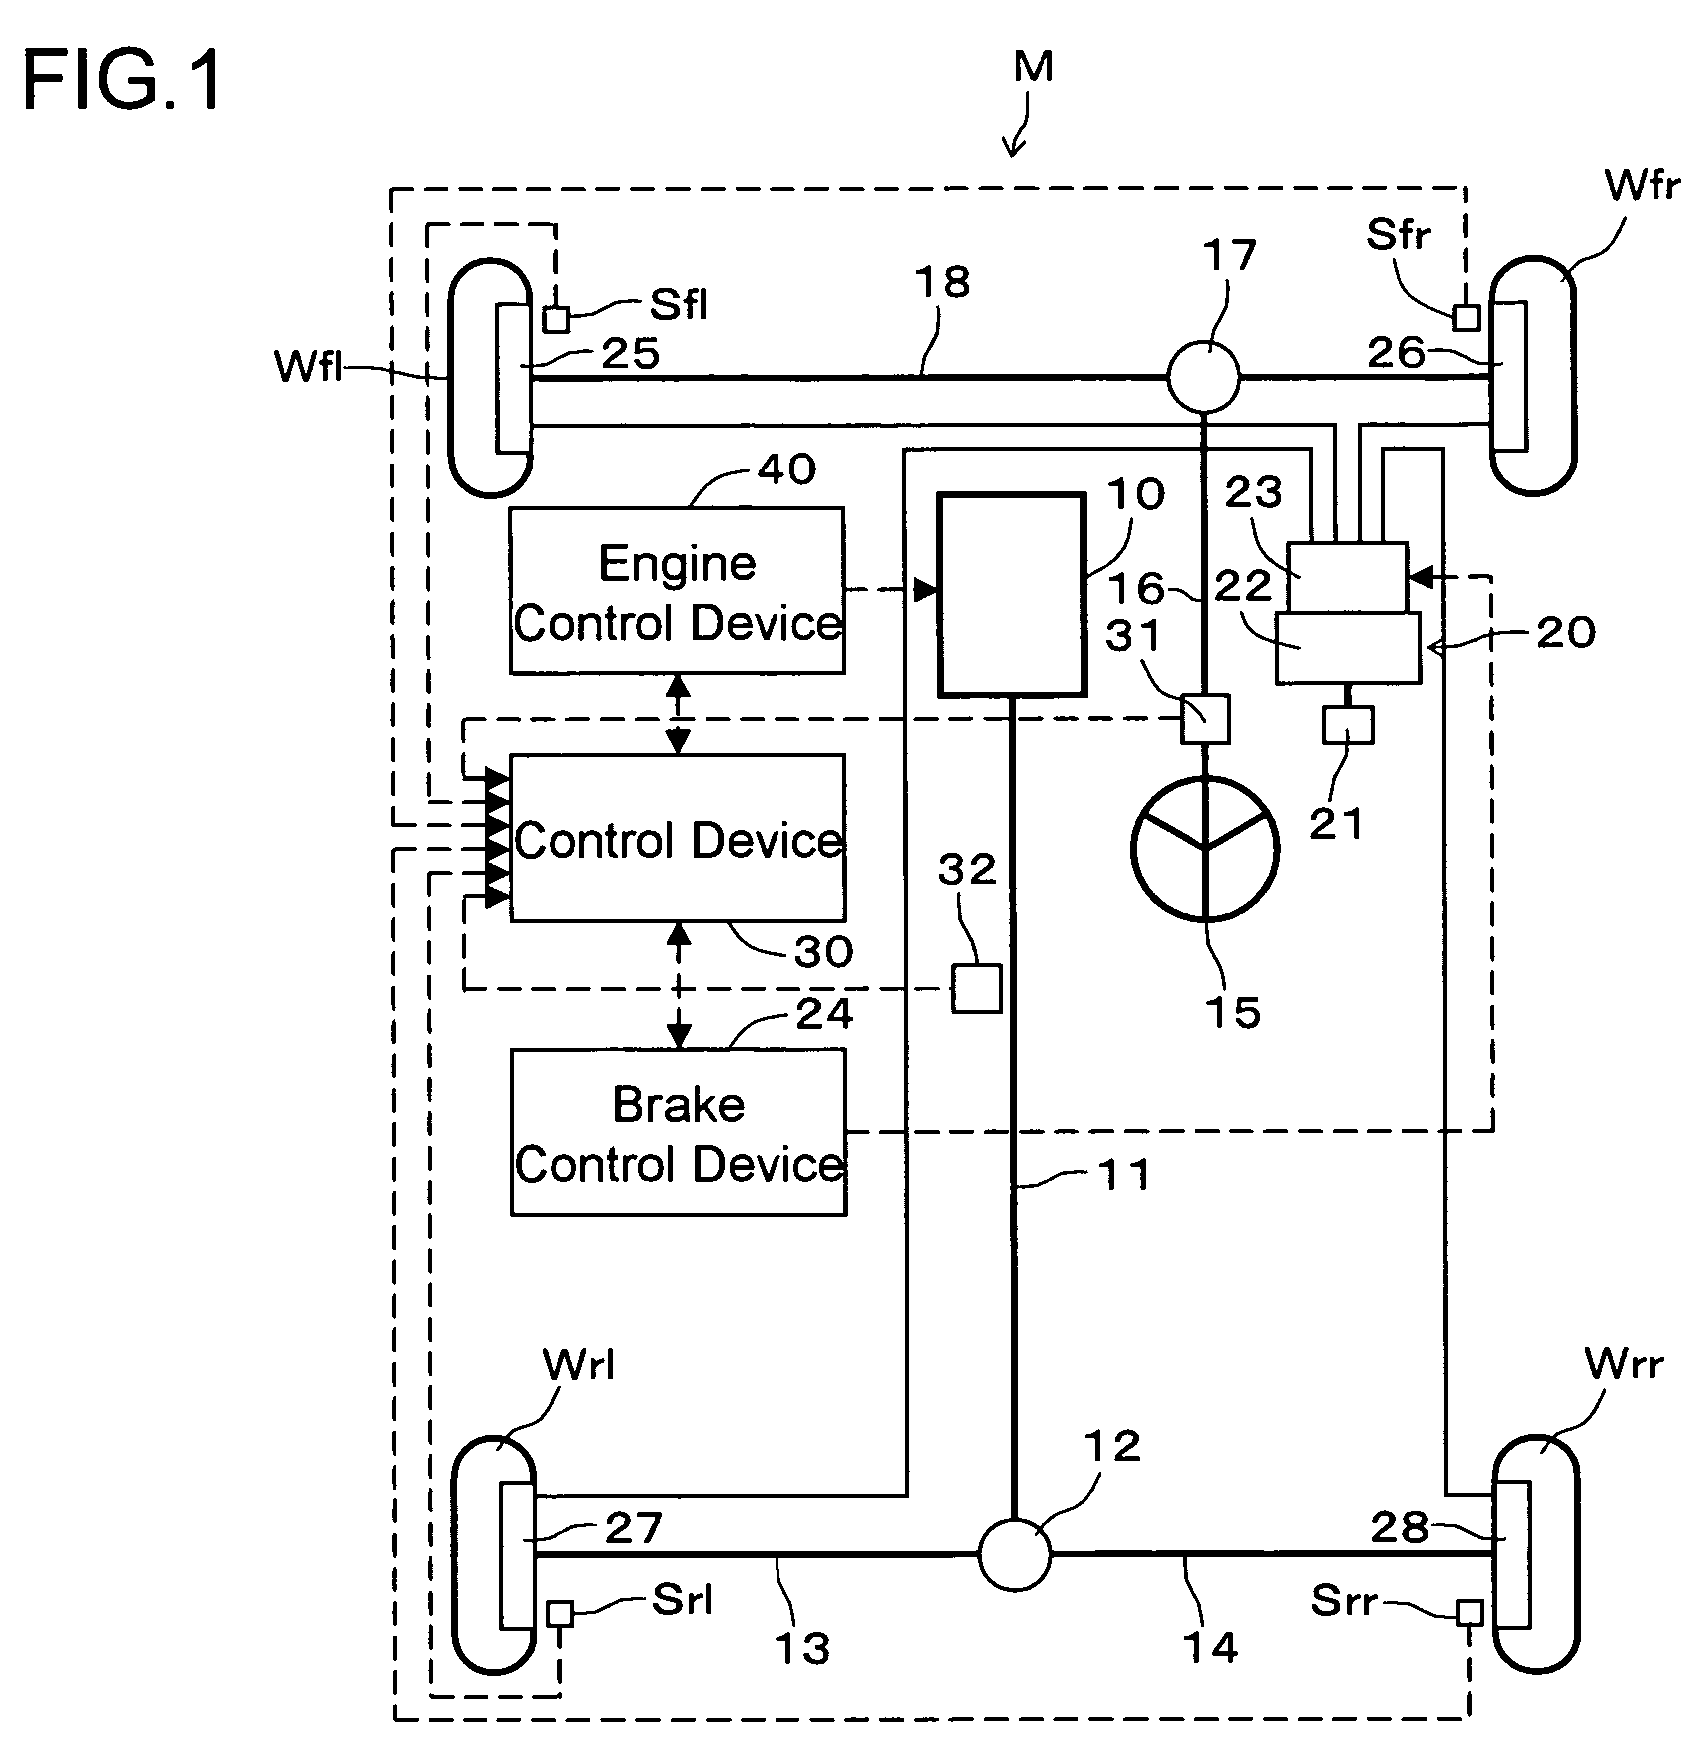 Vehicle attitude control device based on stability factor